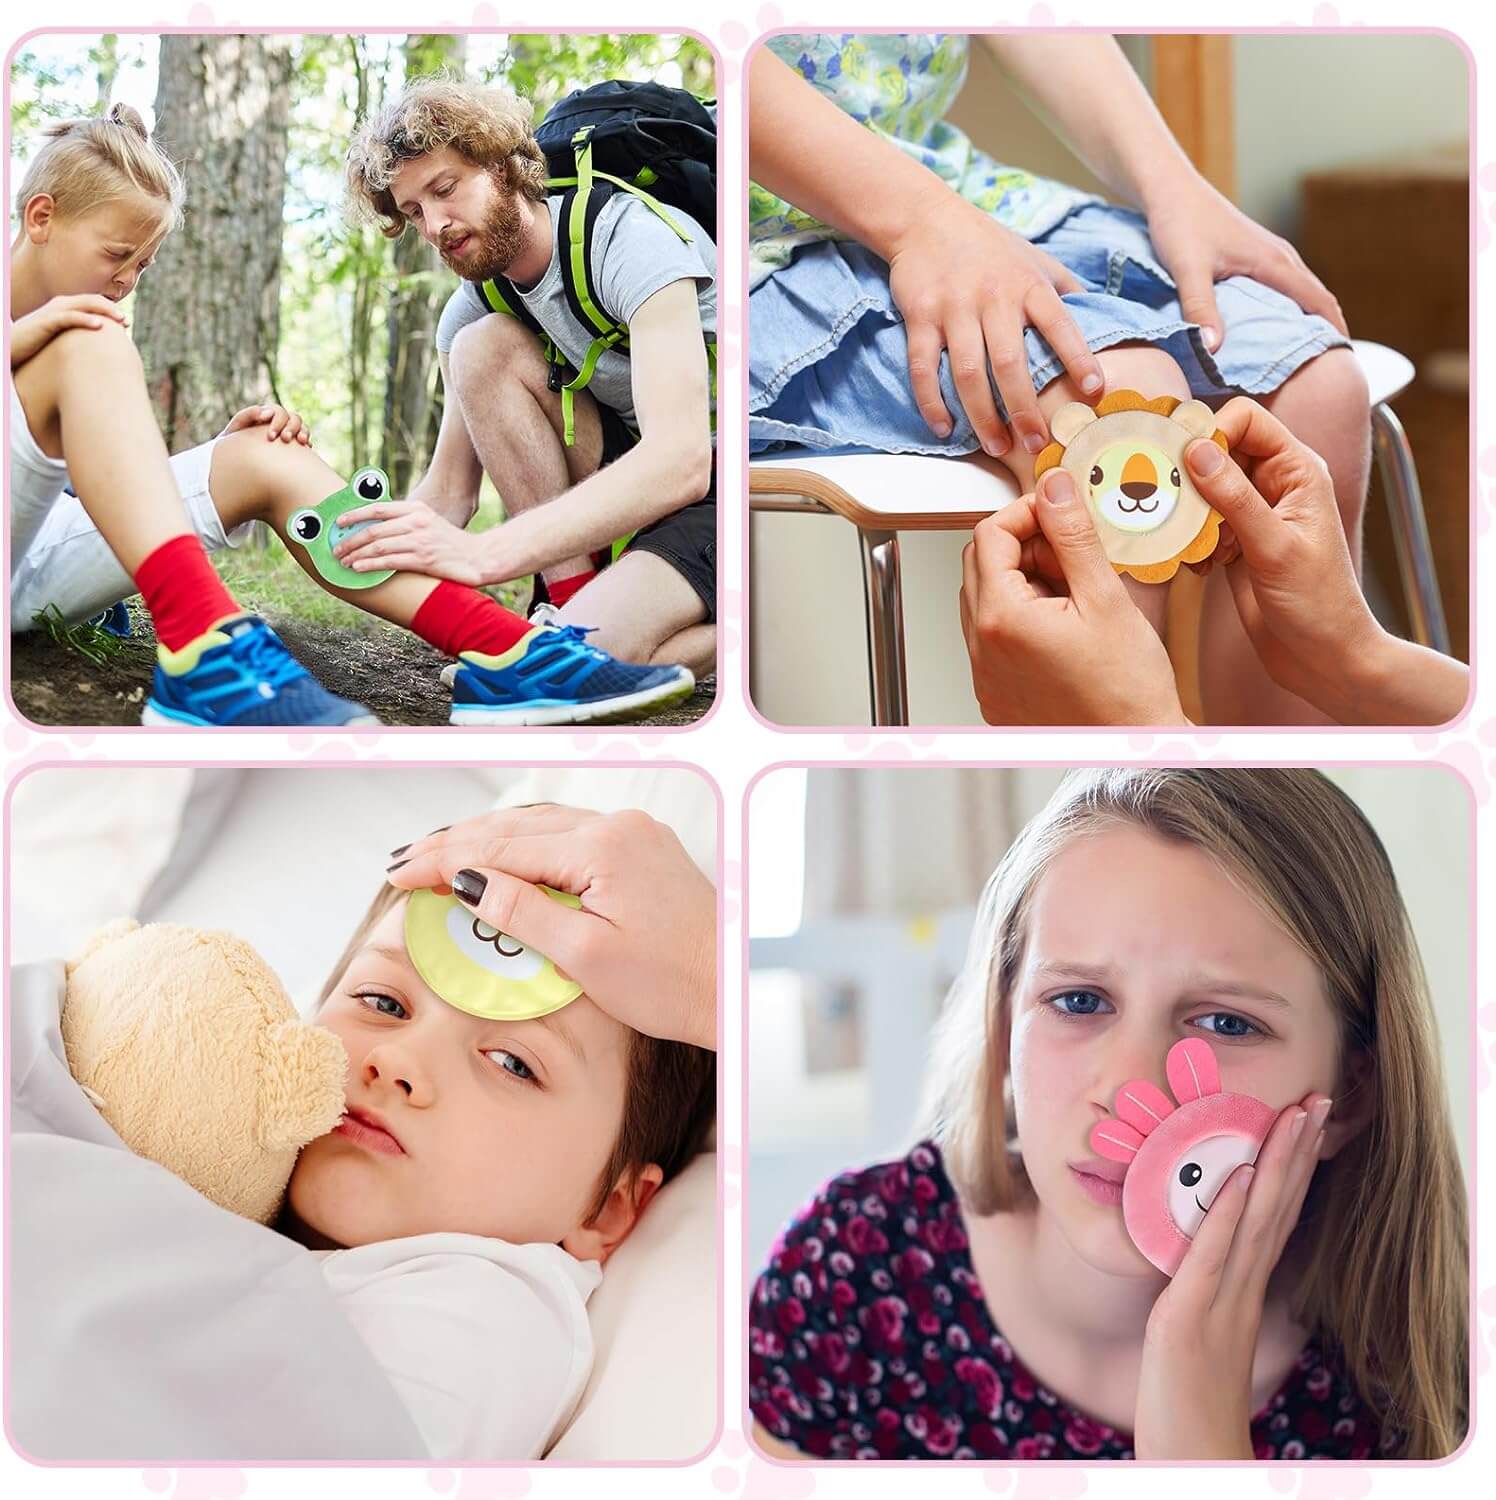 REVIX Boo Boo Ice Packs for Kids Injuries, Fever with Cloth Covers